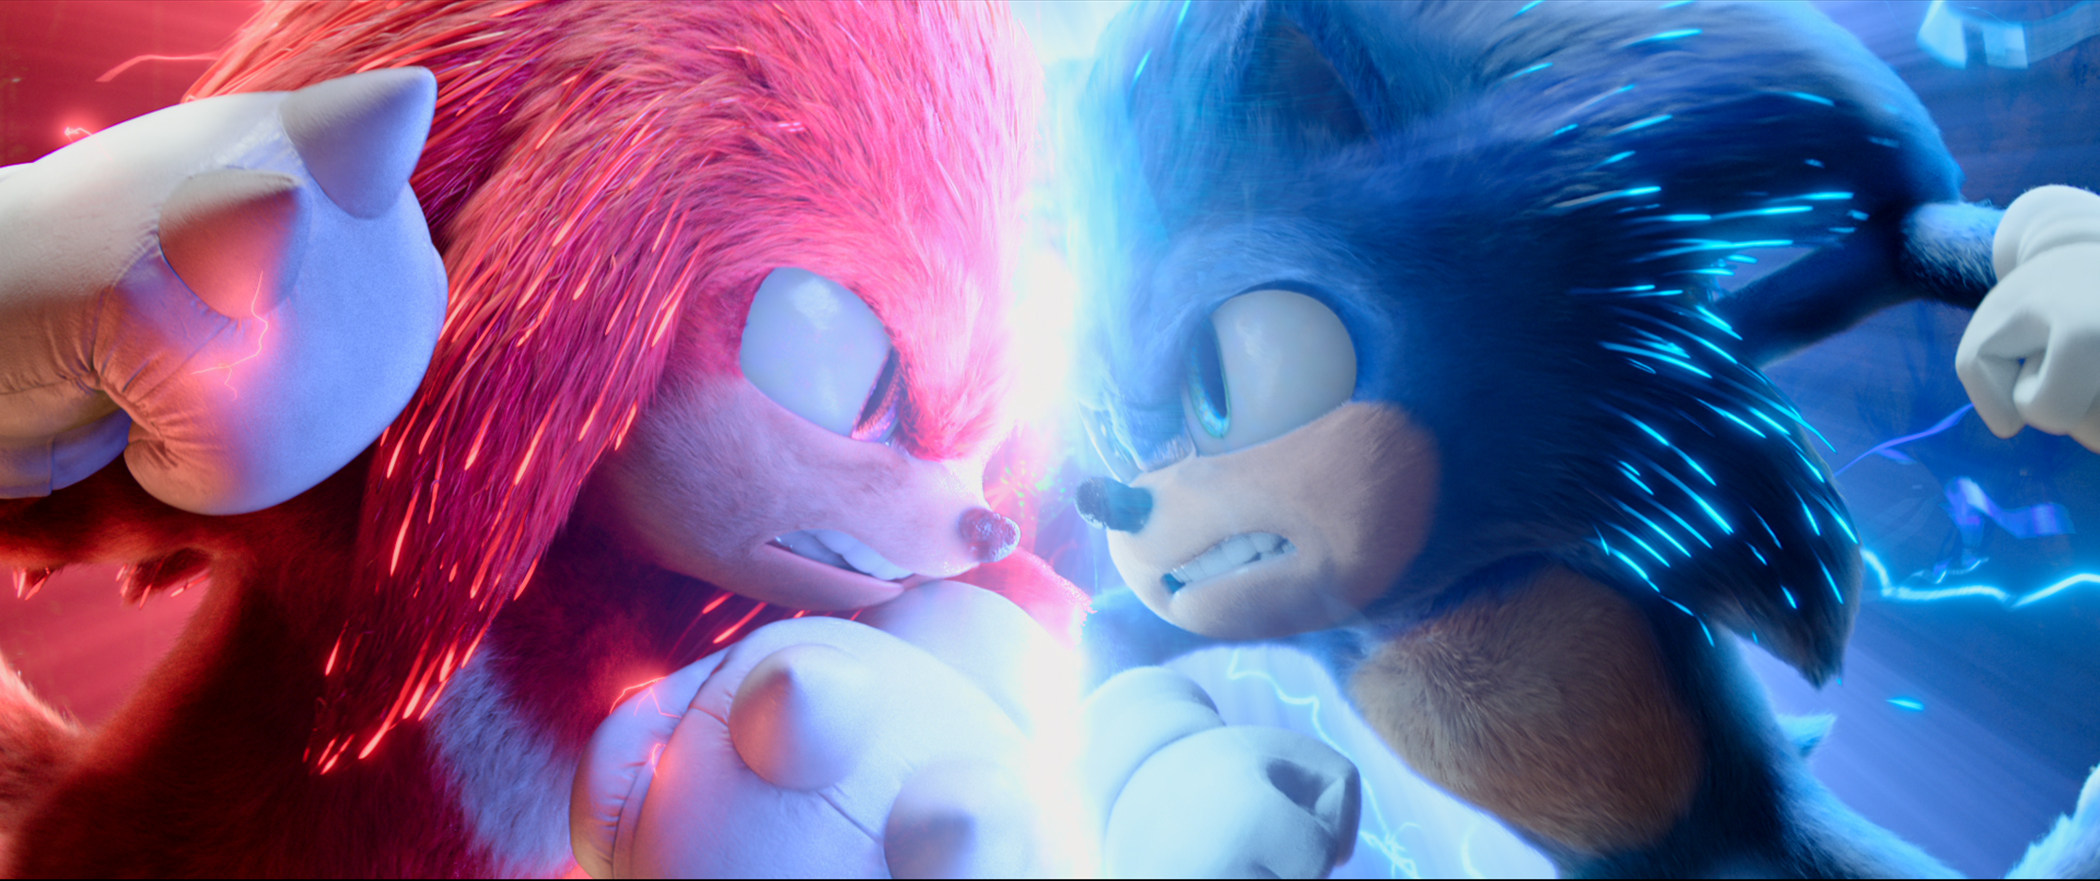 Knuckles (left, voiced by Idris Elba) and Sonic (Ben Schwartz) in a still from Sonic the Hedgehog 2. Photo: Paramount Pictures and Sega.